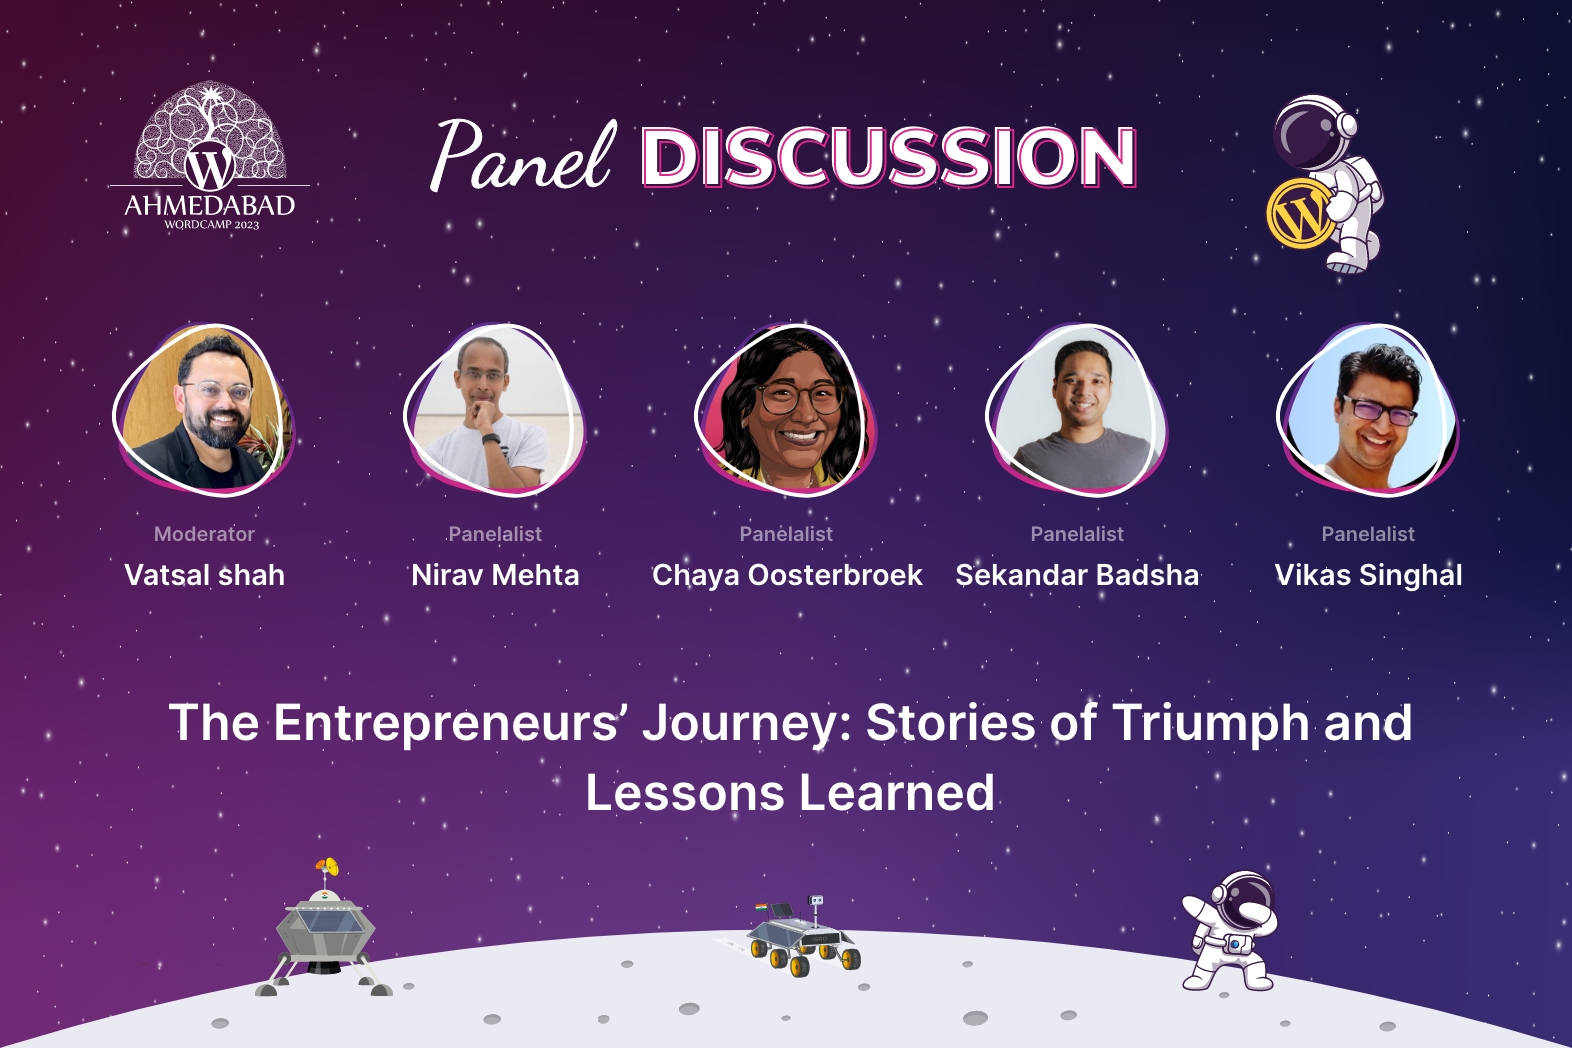 The Entrepreneurs’ Journey: Stories of Triumph and Lessons Learned